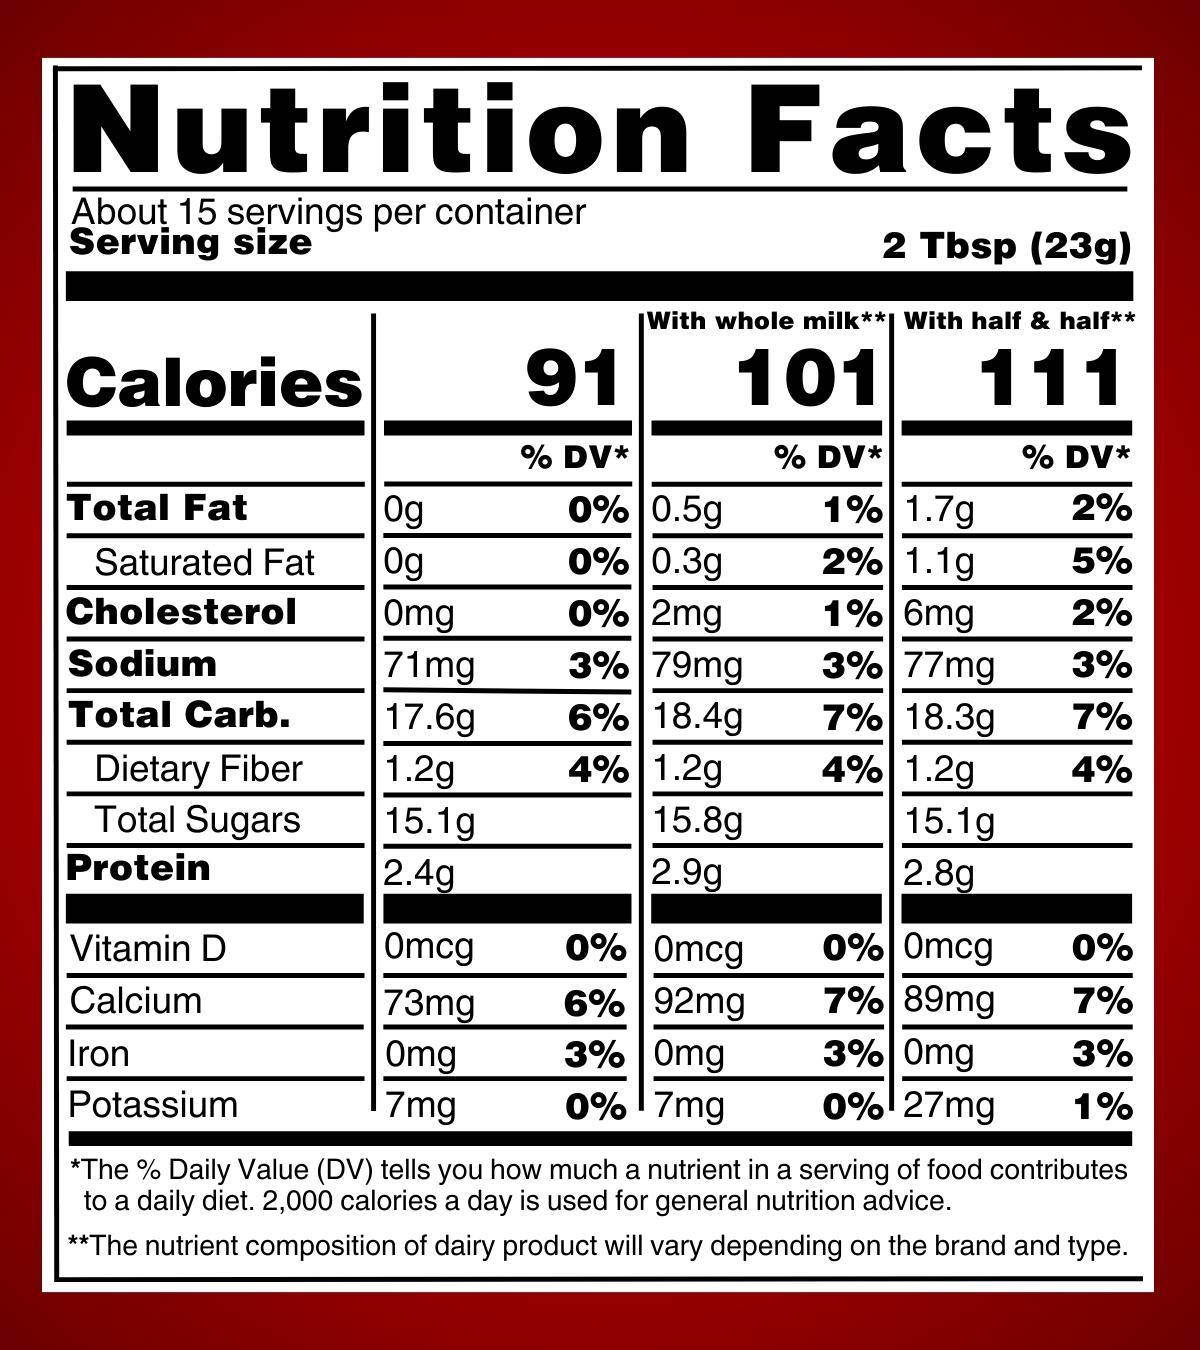 Birch Boys Chaga Hot Chocolate Nutrition Facts - On its own, 91 calories, with whole milk, 101 calories, with half and half, 111 calories. Calories may vary based on dairy used.